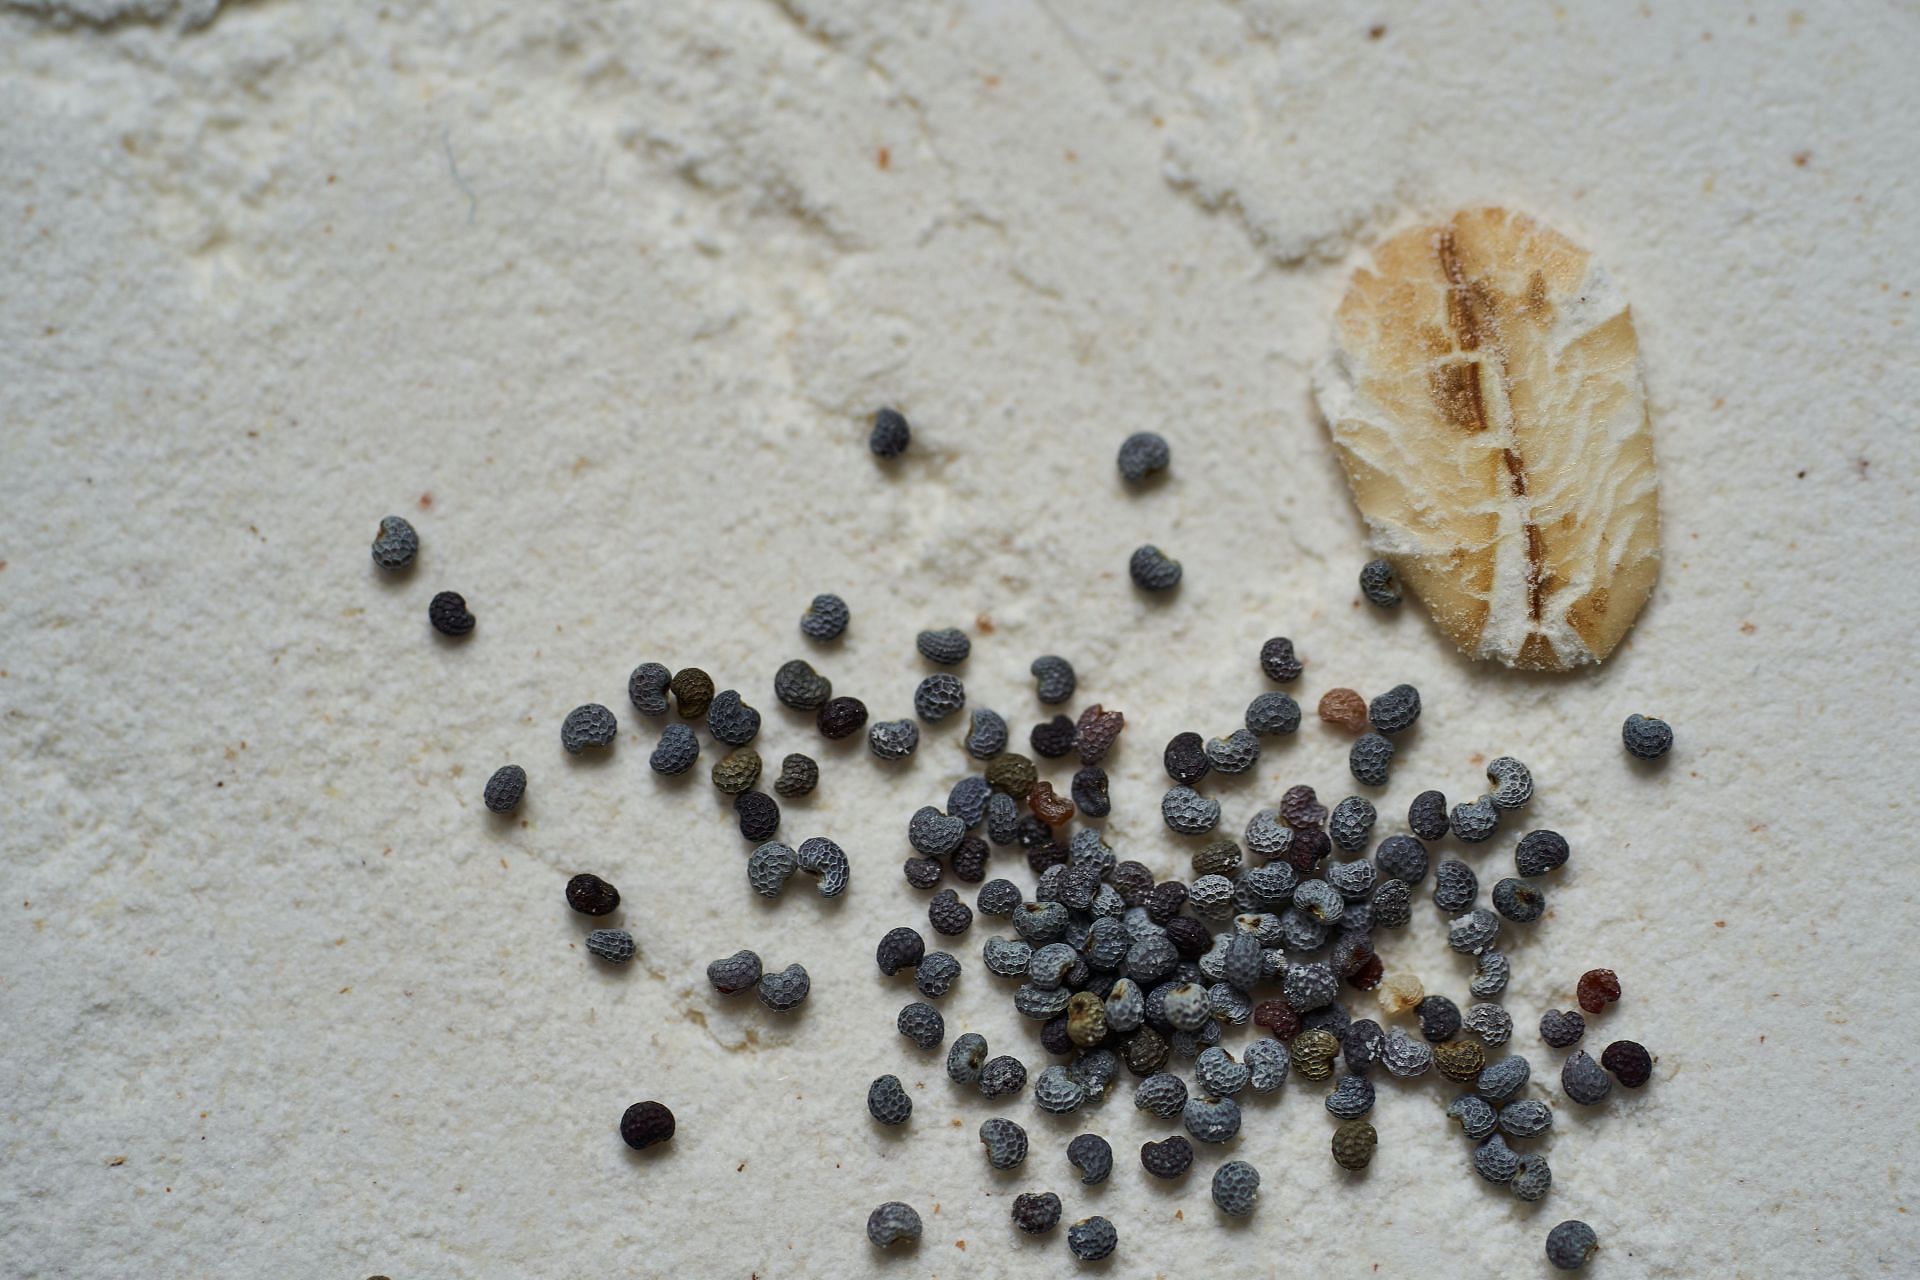 These seeds are good for health. (Image via Unsplash/ Wolfgang Hasselmann)